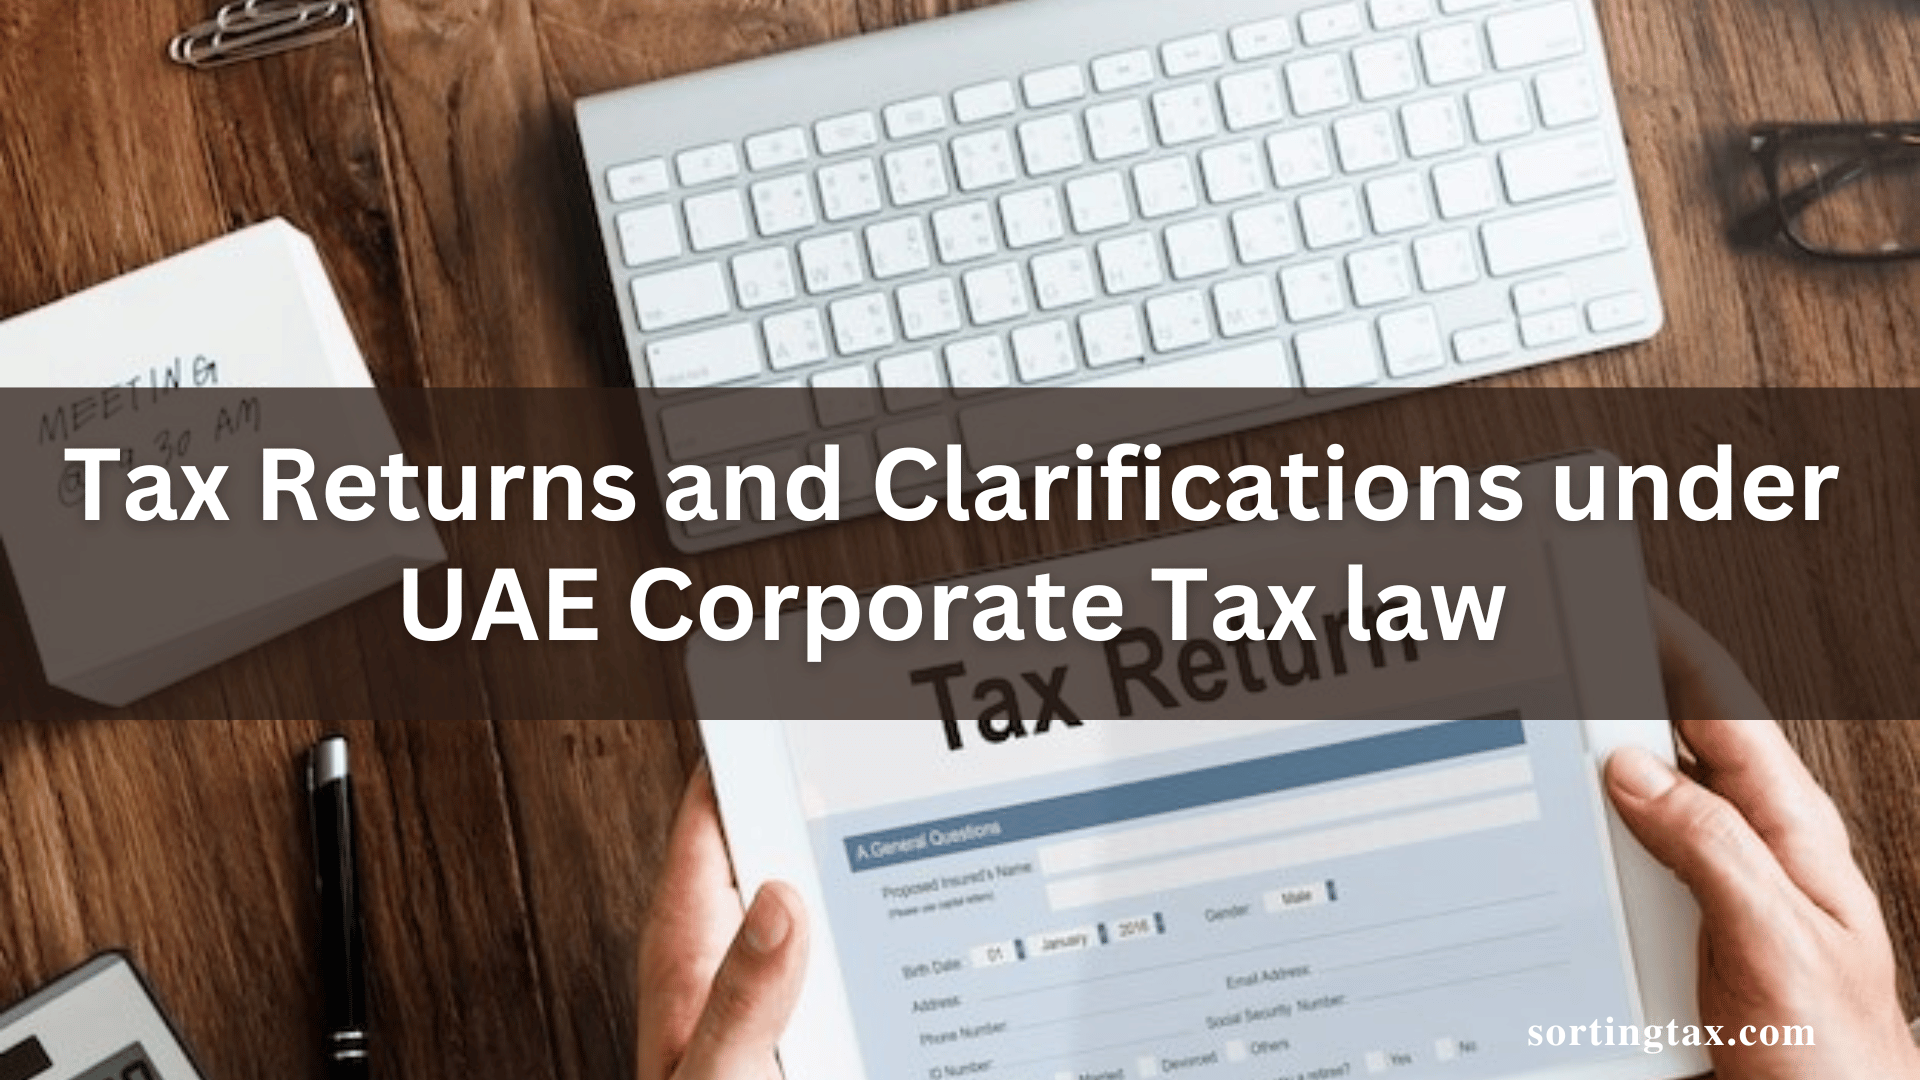 Tax Returns and Clarifications under UAE Corporate Tax law